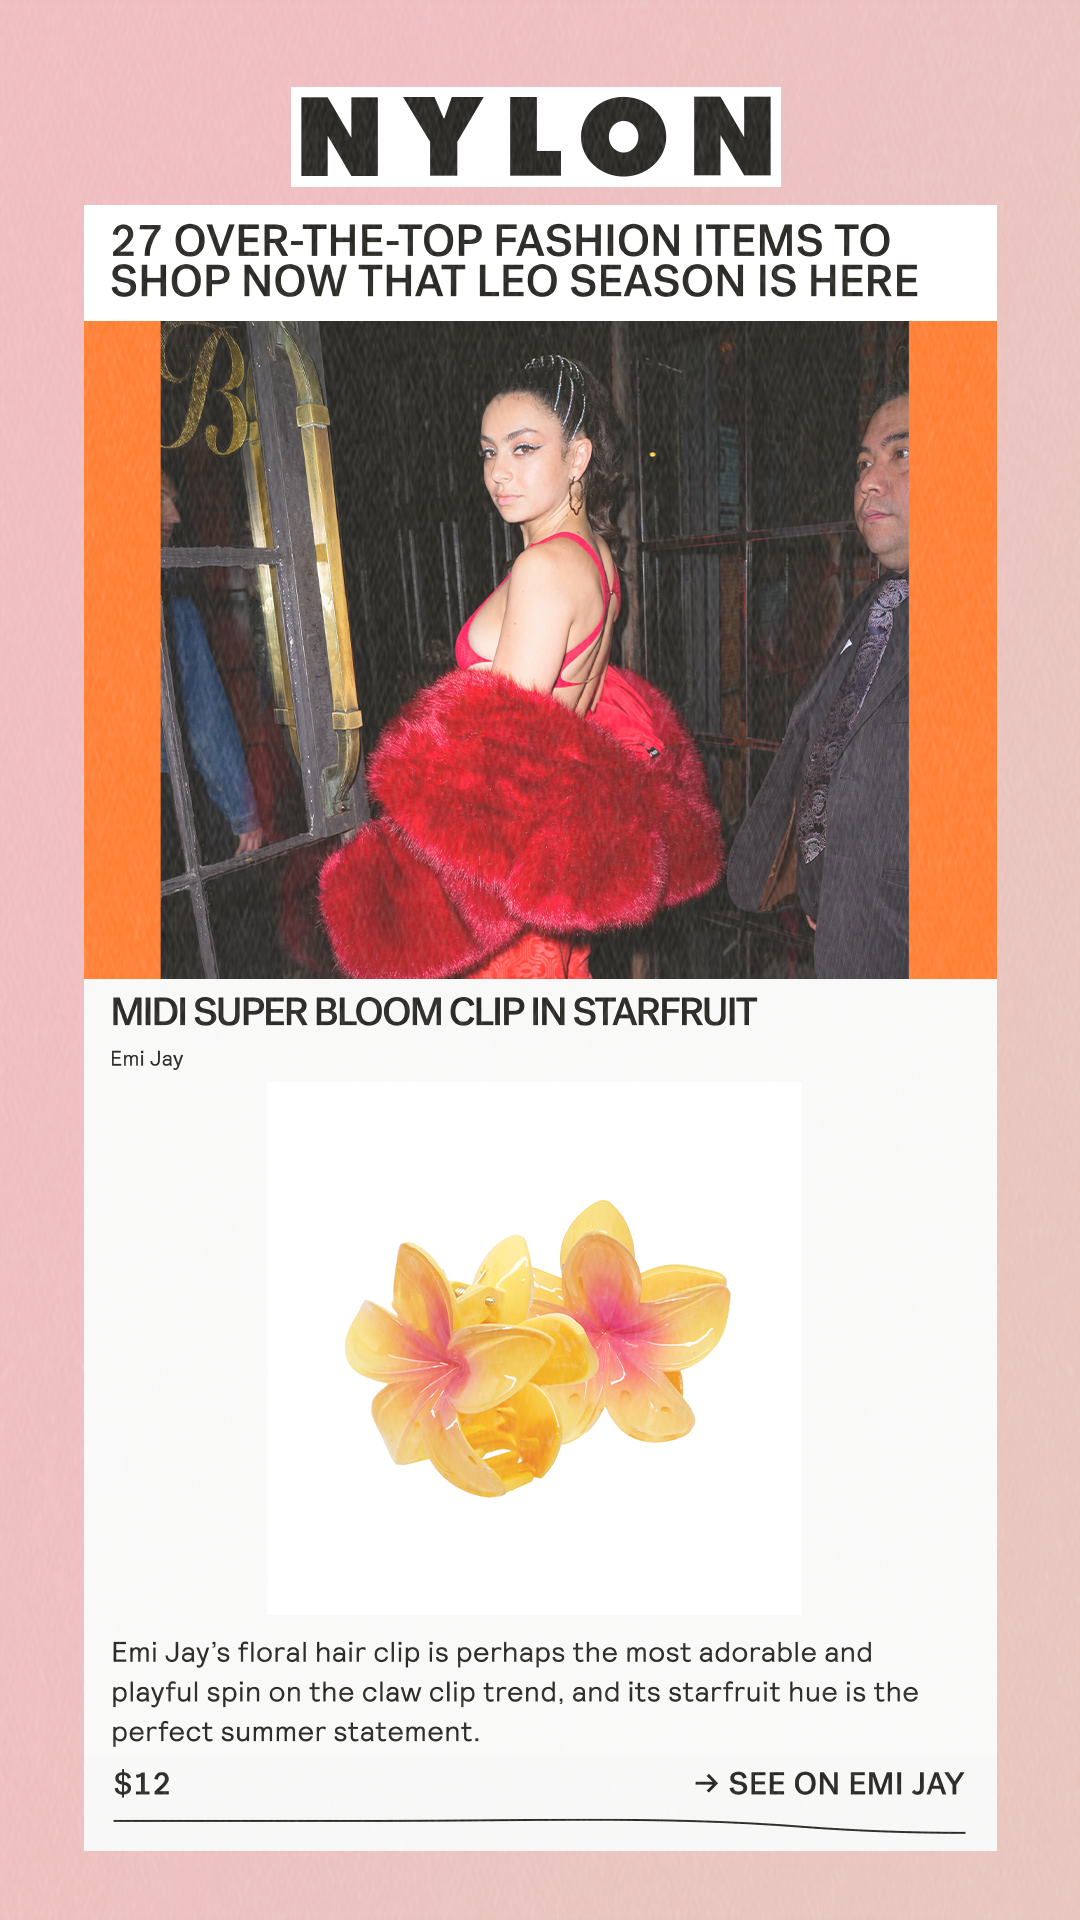 27 Over-The-Top Fashion Items To Shop Now That Leo Season Is Here MIDI SUPER BLOOM CLIP IN STARFRUIT Emi Jay Emi Jay’s floral hair clip is perhaps the most adorable and playful spin on the claw clip trend, and its starfruit hue is the perfect summer statement. $12 See on Emi Jay